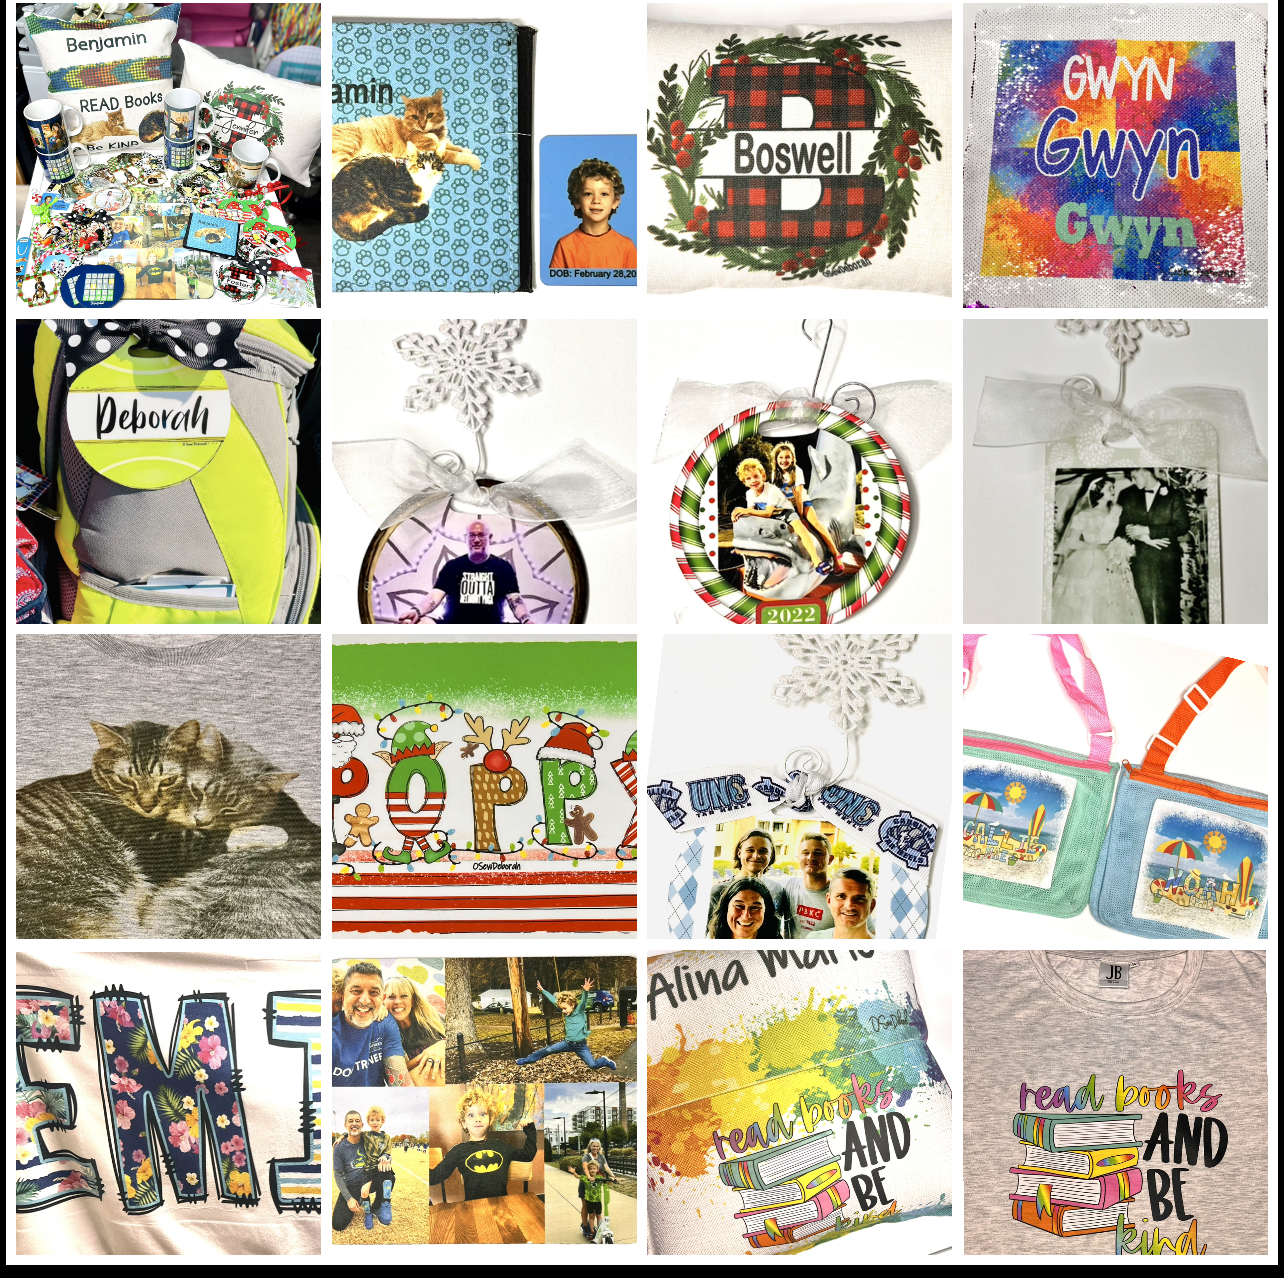 A variety of items including Pillowcases, LumbarPillows,Mugs, Coasters,Ornaments, Bagtags,Keych